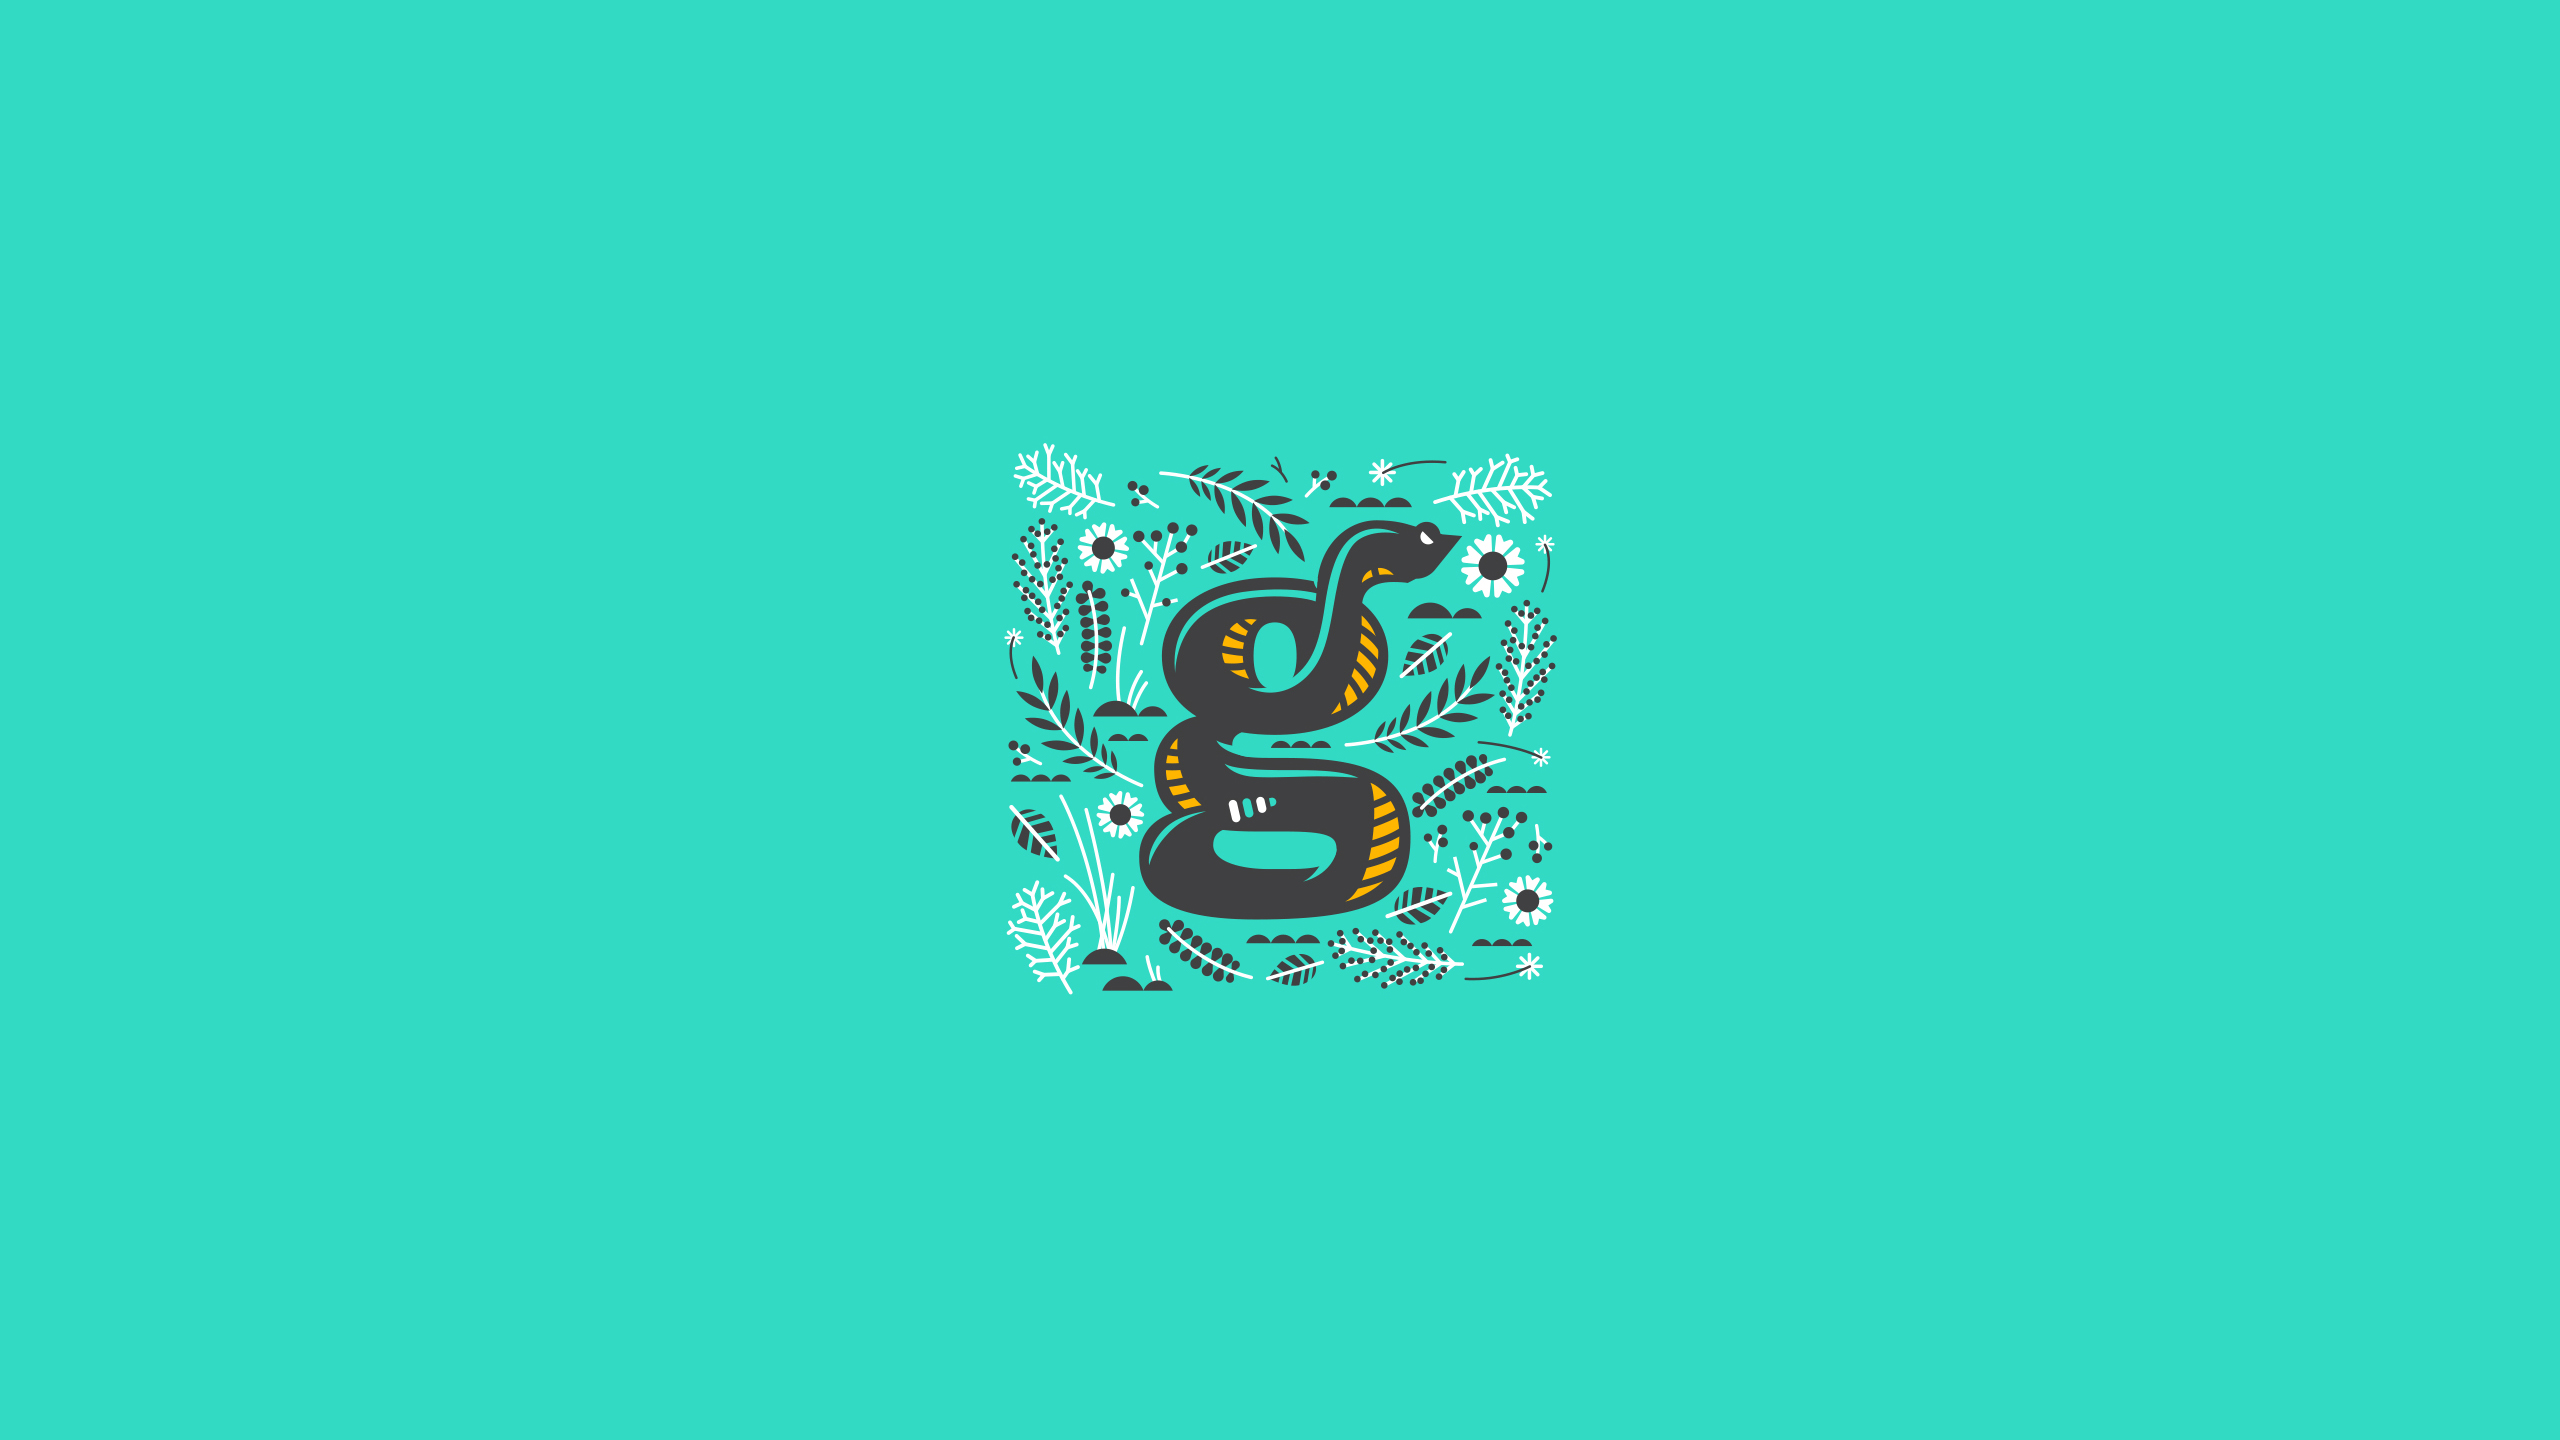 General 2560x1440 illustration letter teal turquoise snake typography minimalism cyan background cyan